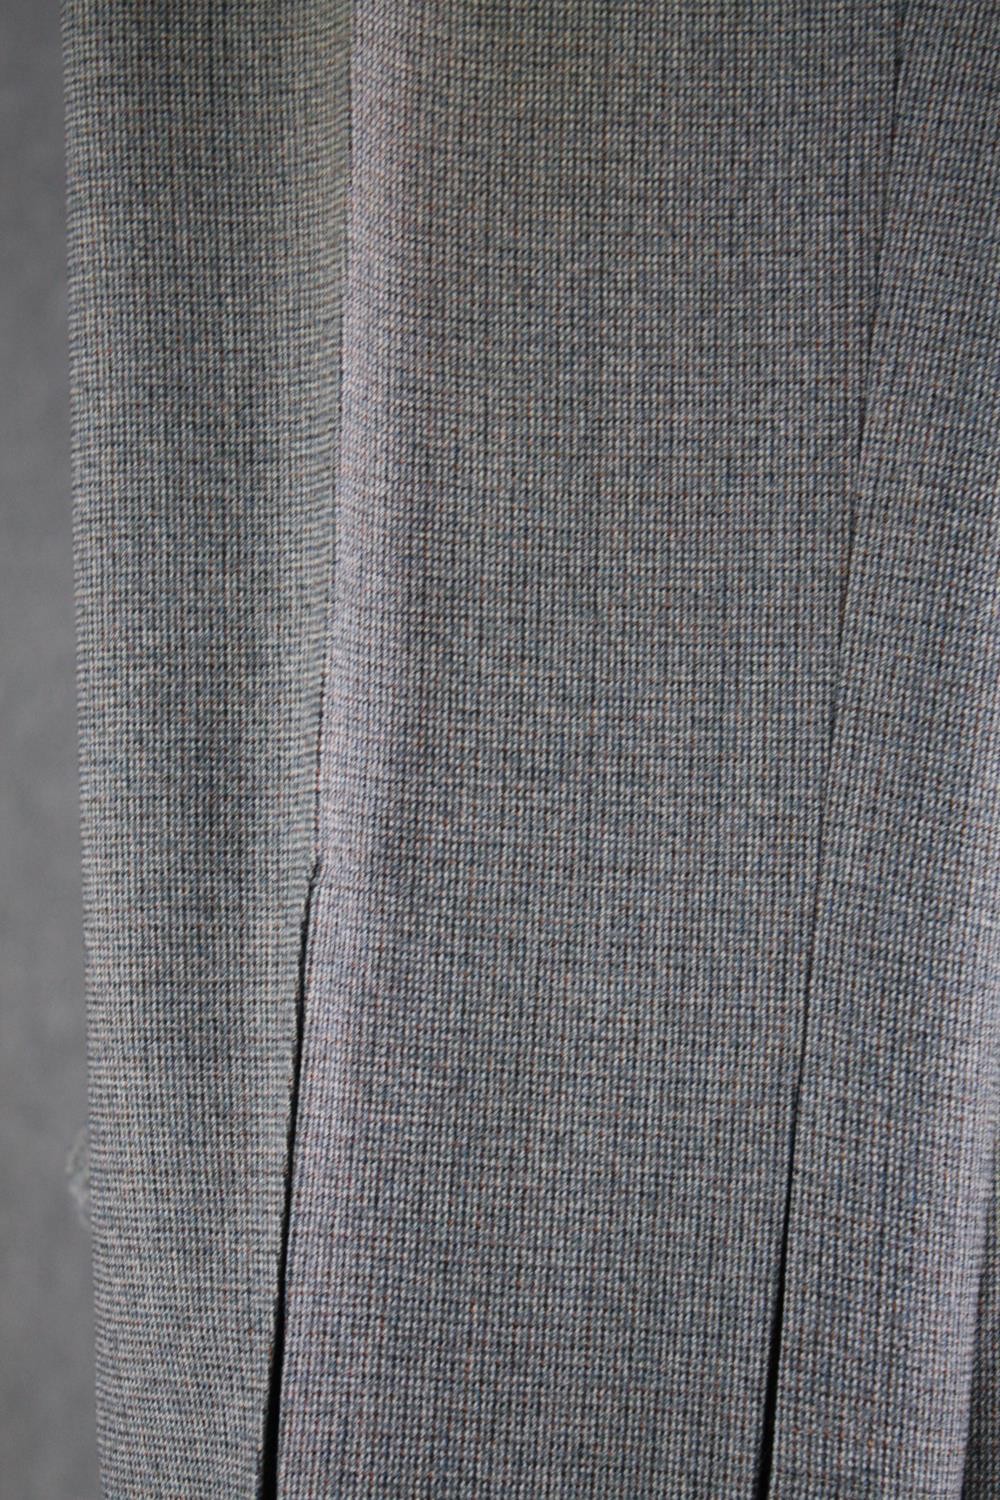 A bespoke made vintage grey tone pin stripe and block design two piece suit with mother of pearl - Image 4 of 6